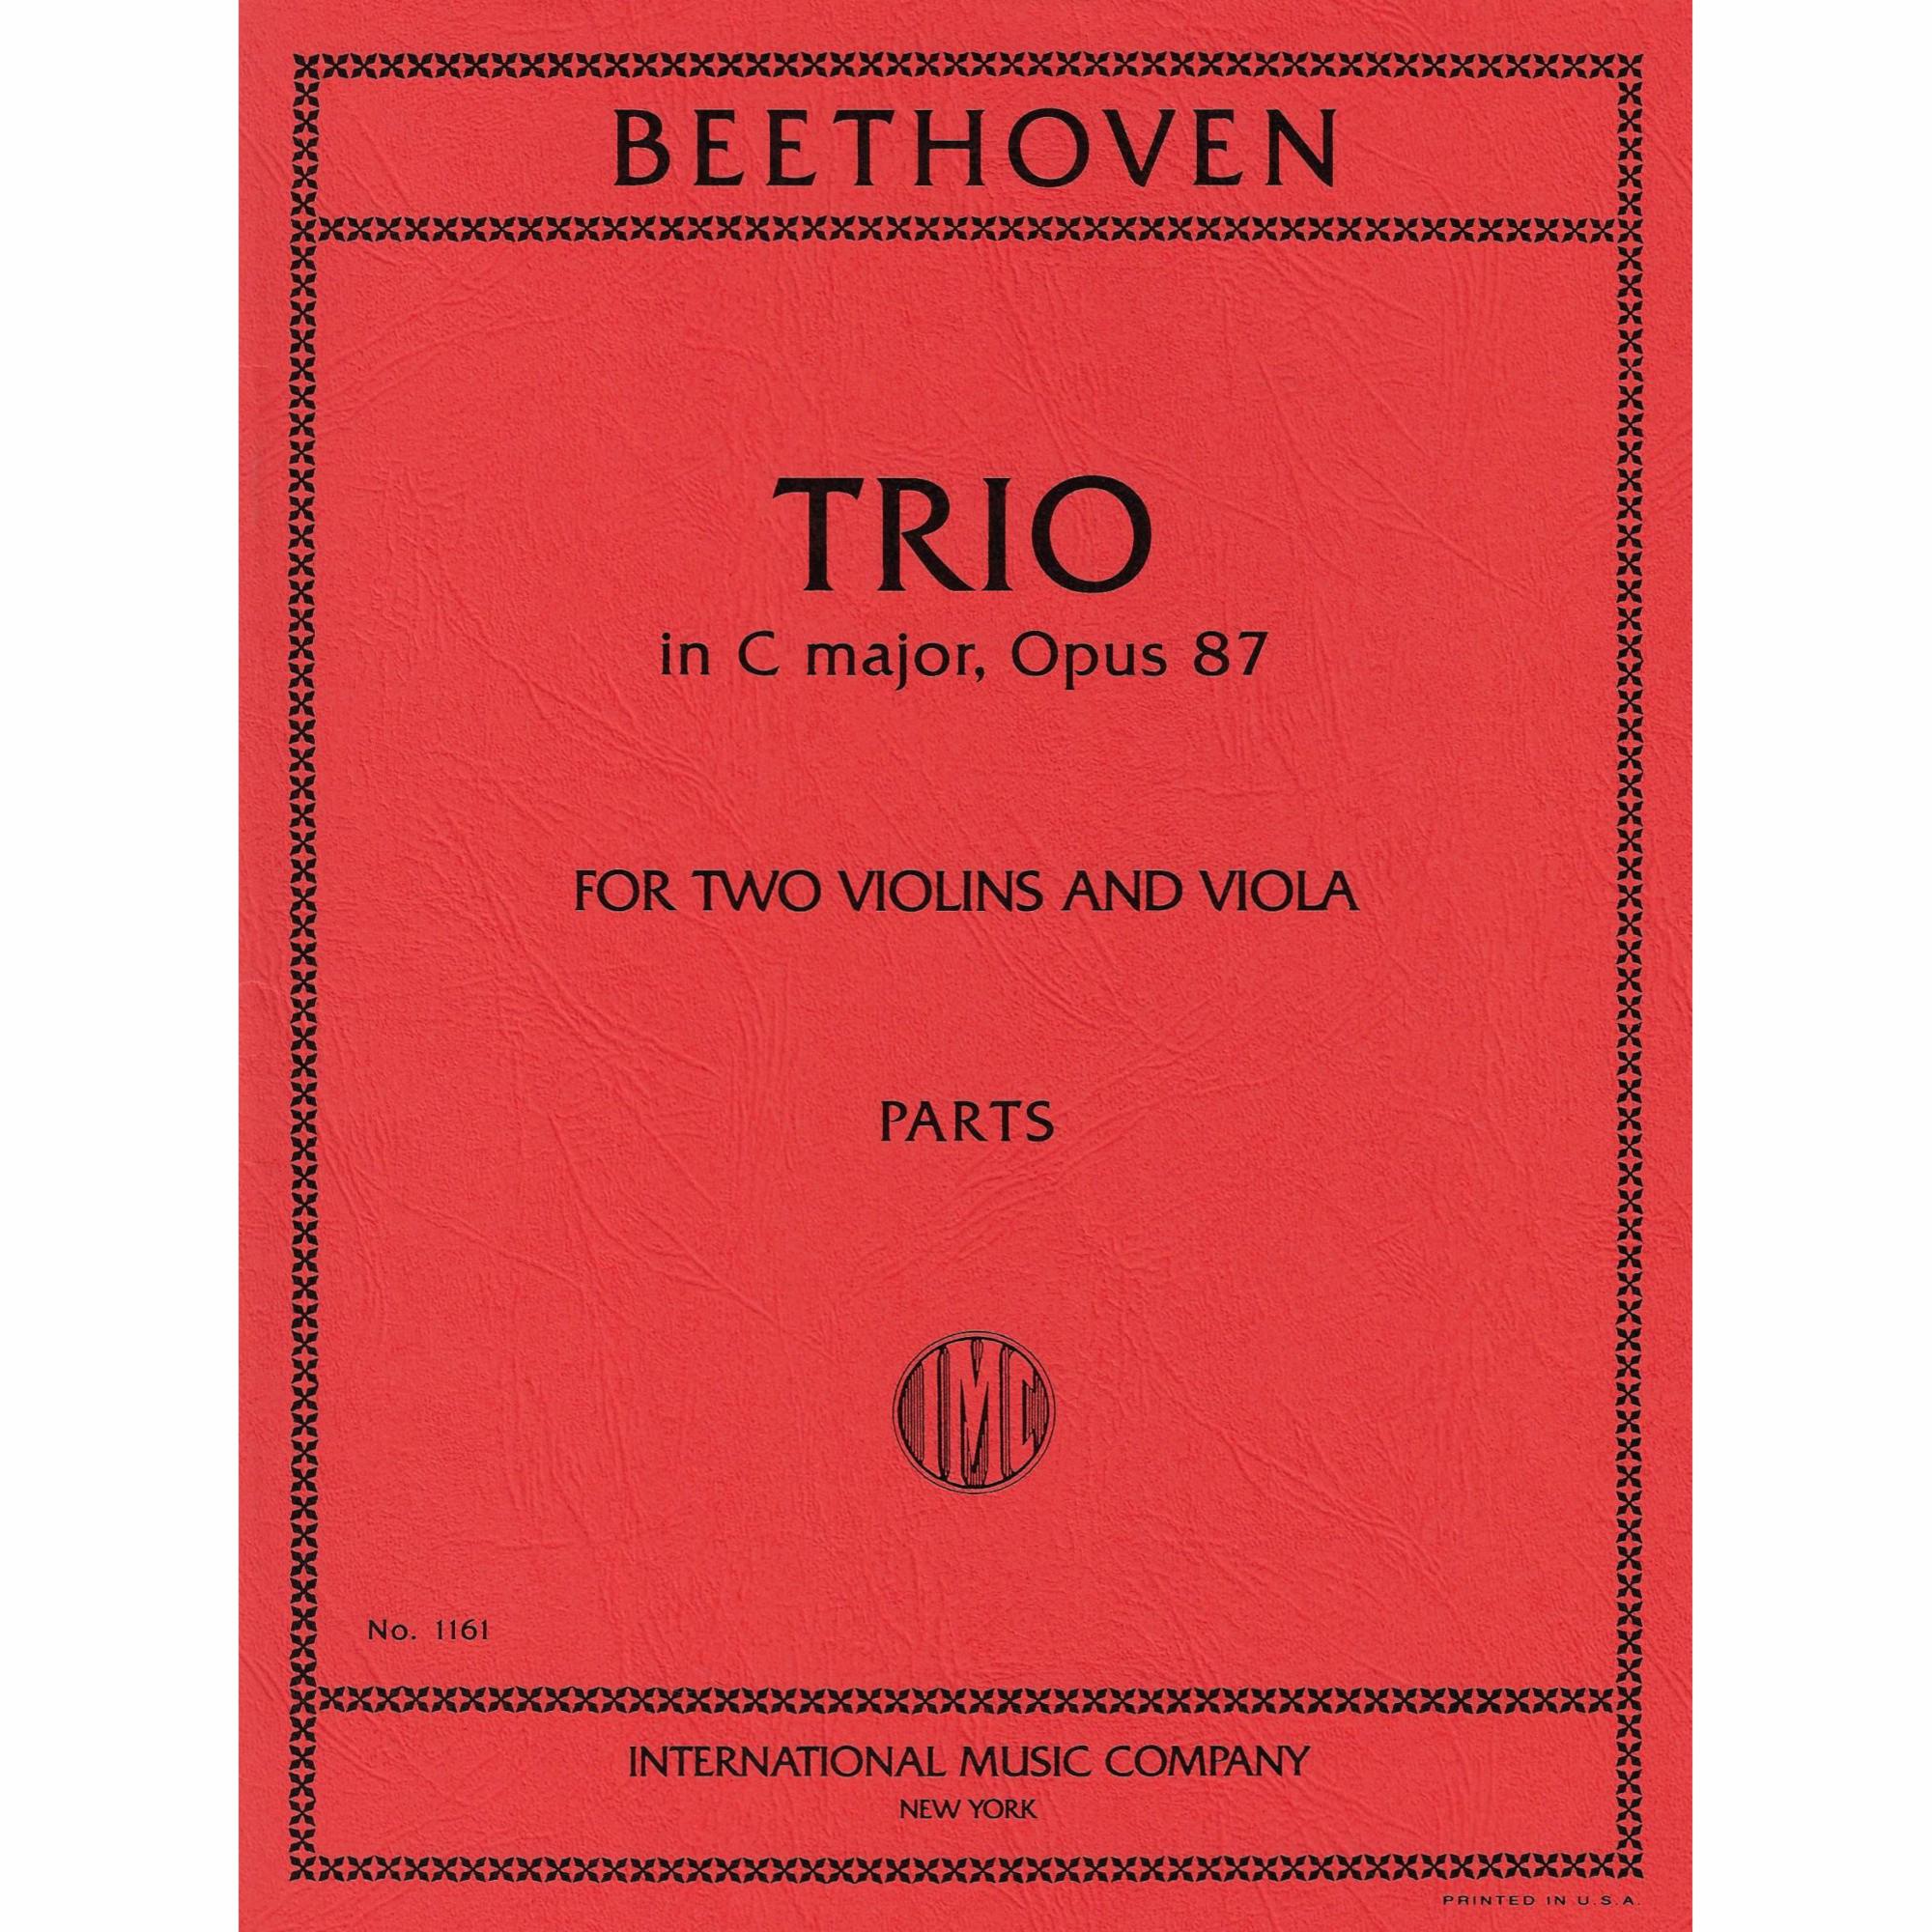 Beethoven -- Trio in C Major, Op. 87 for Two Violins and Viola